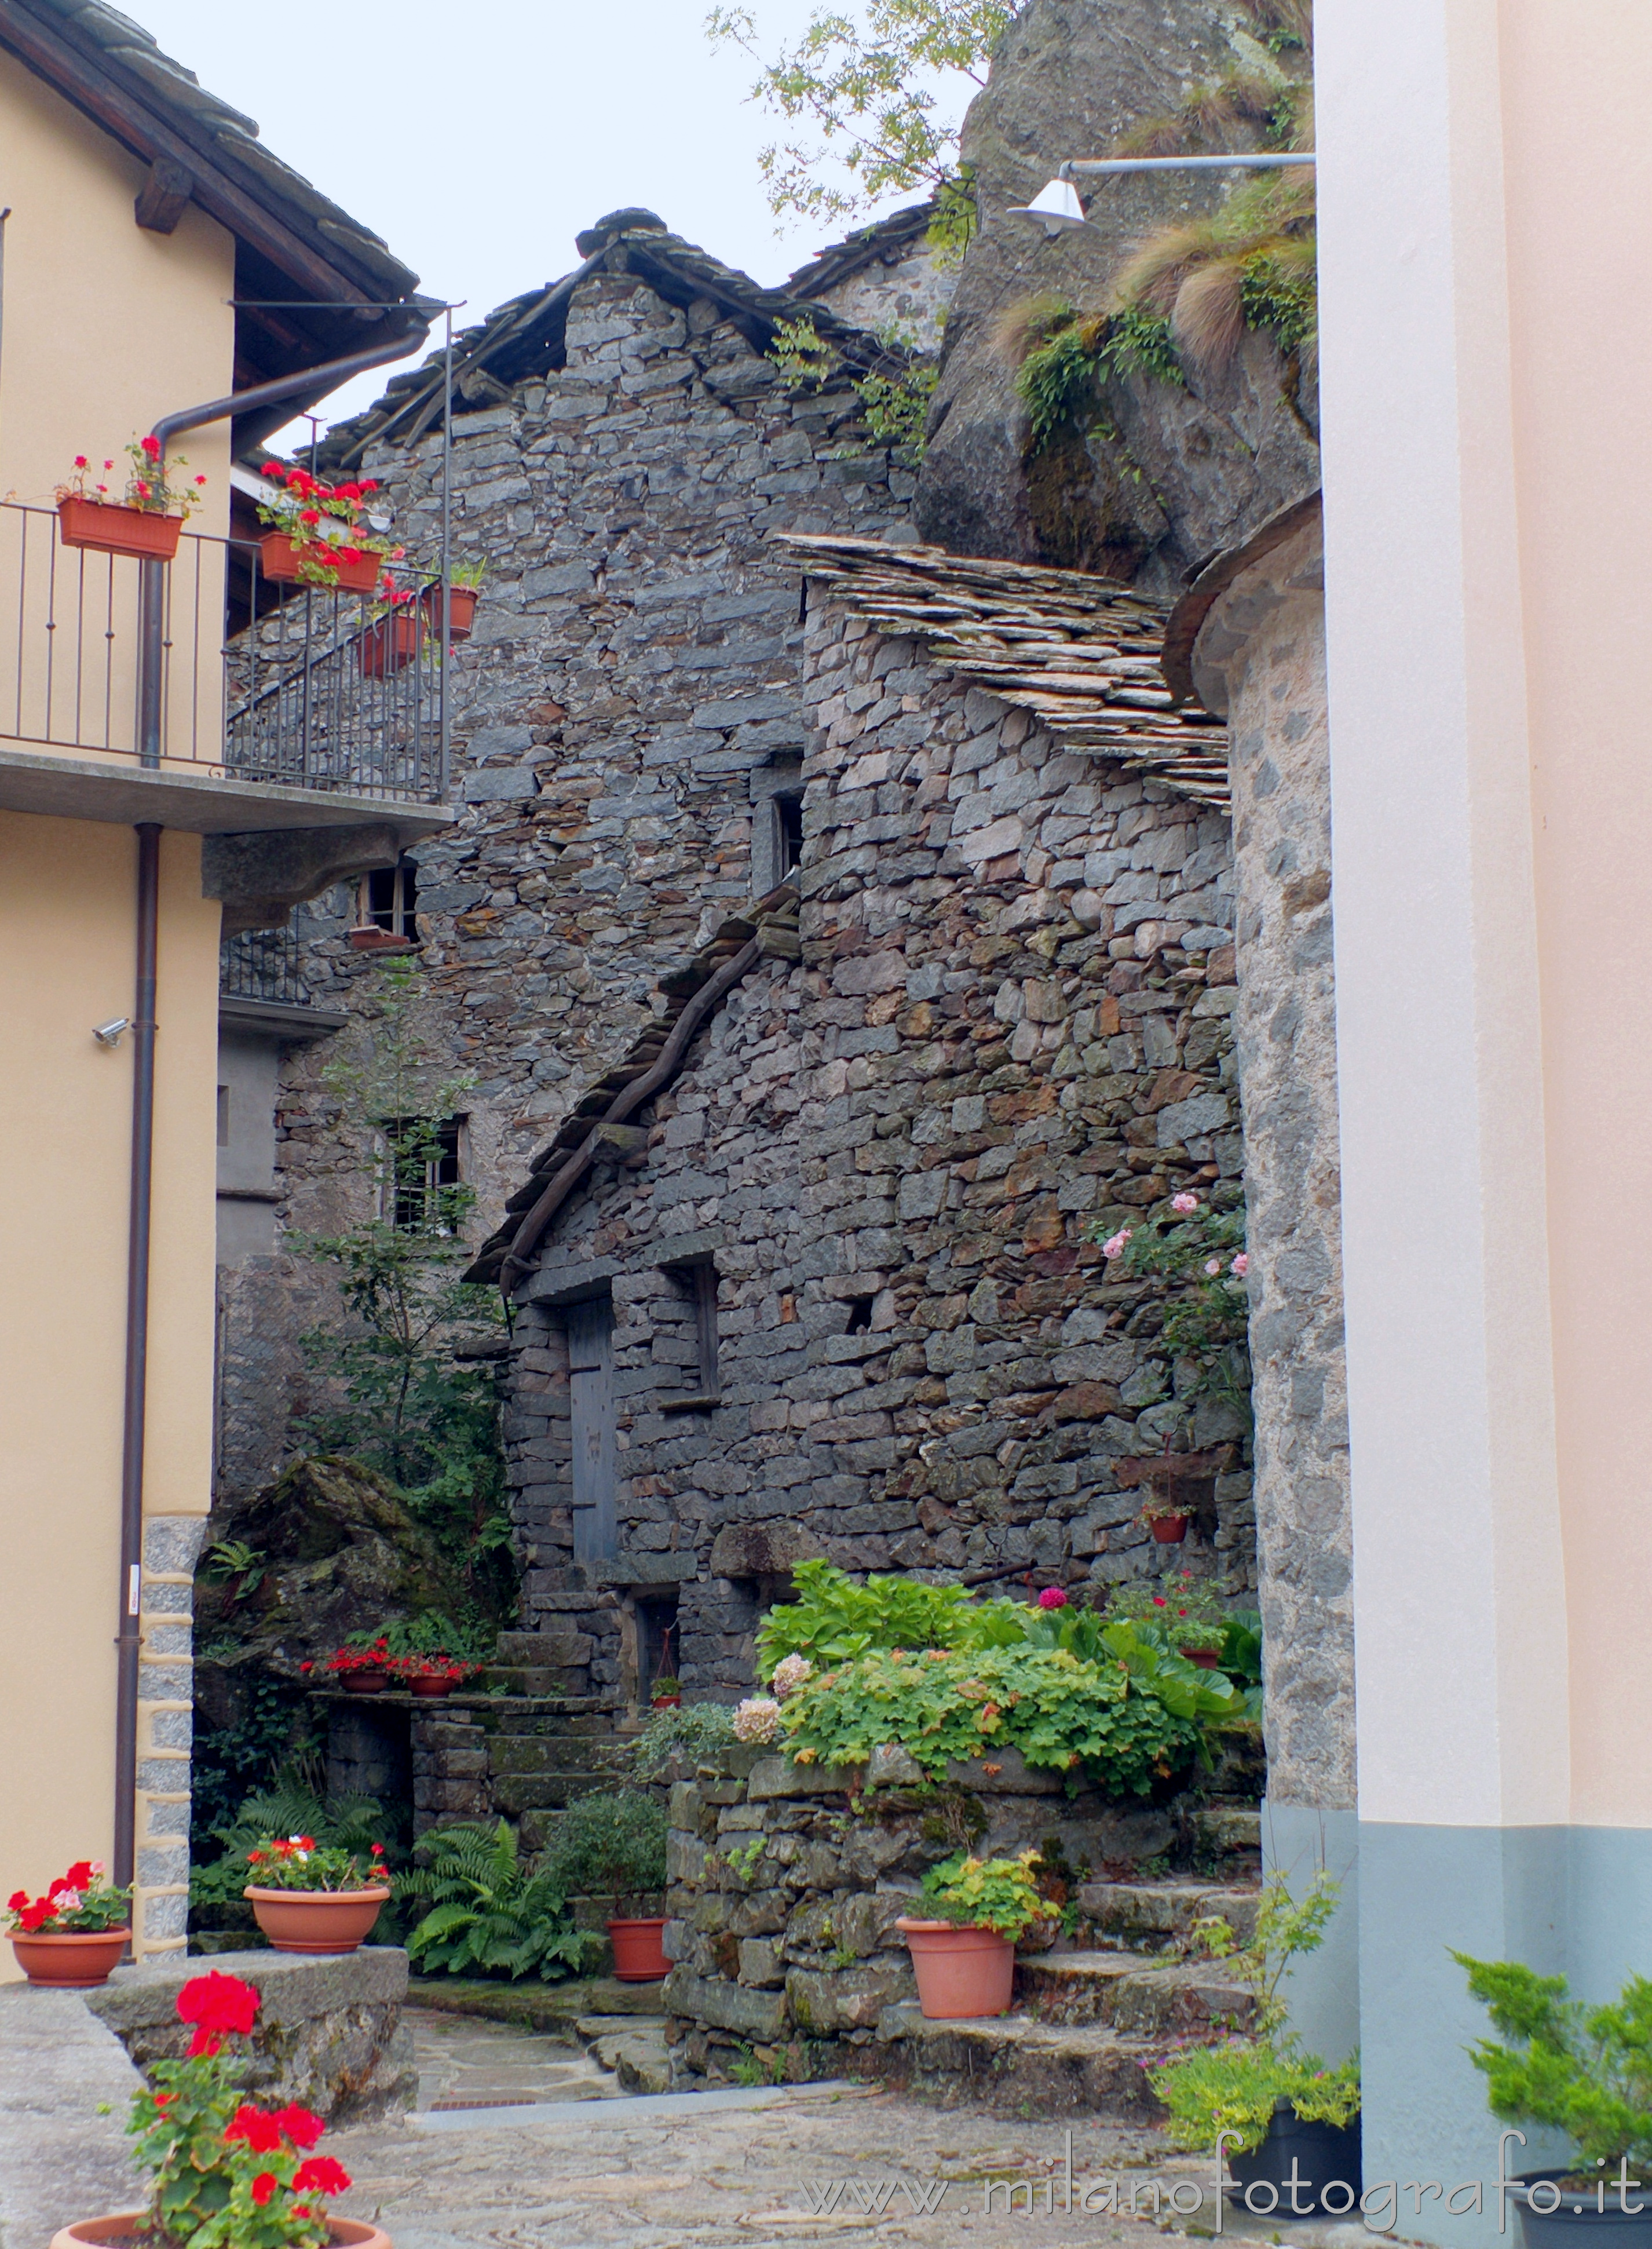 Rosazza (Biella (Italy)): Old houses beside the Oratory of San Defendente - Rosazza (Biella (Italy))